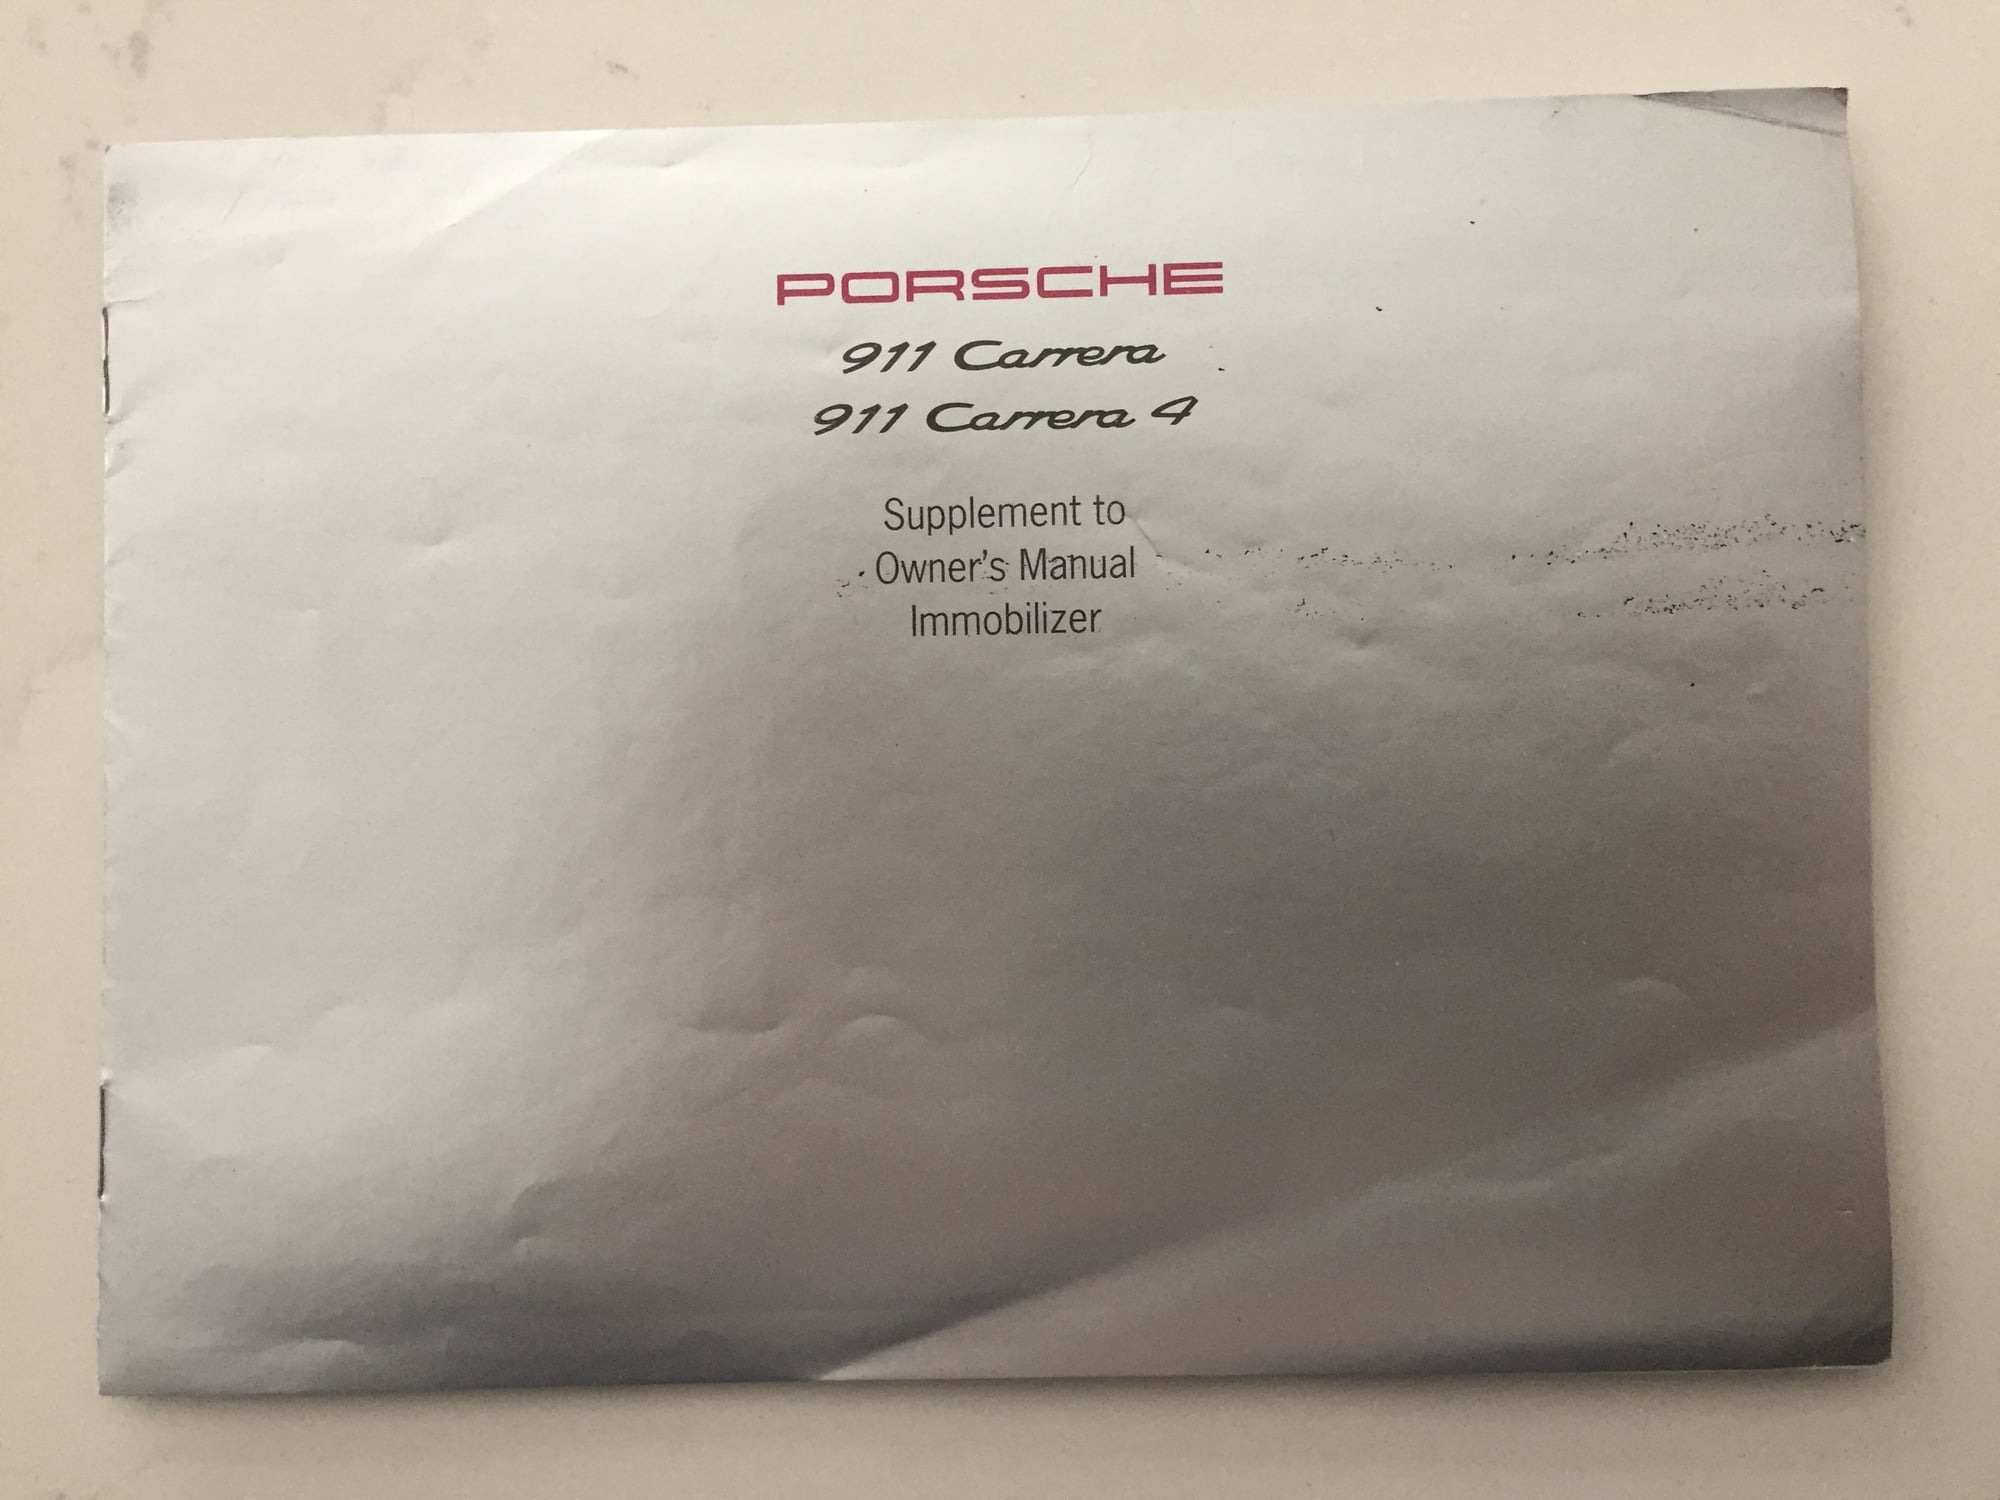 Miscellaneous - Porsche 993 Carrera 911 Immobilizer Supplement to Owners Manual - Used - 1995 to 1998 Porsche 911 - Wayne, PA 19087, United States